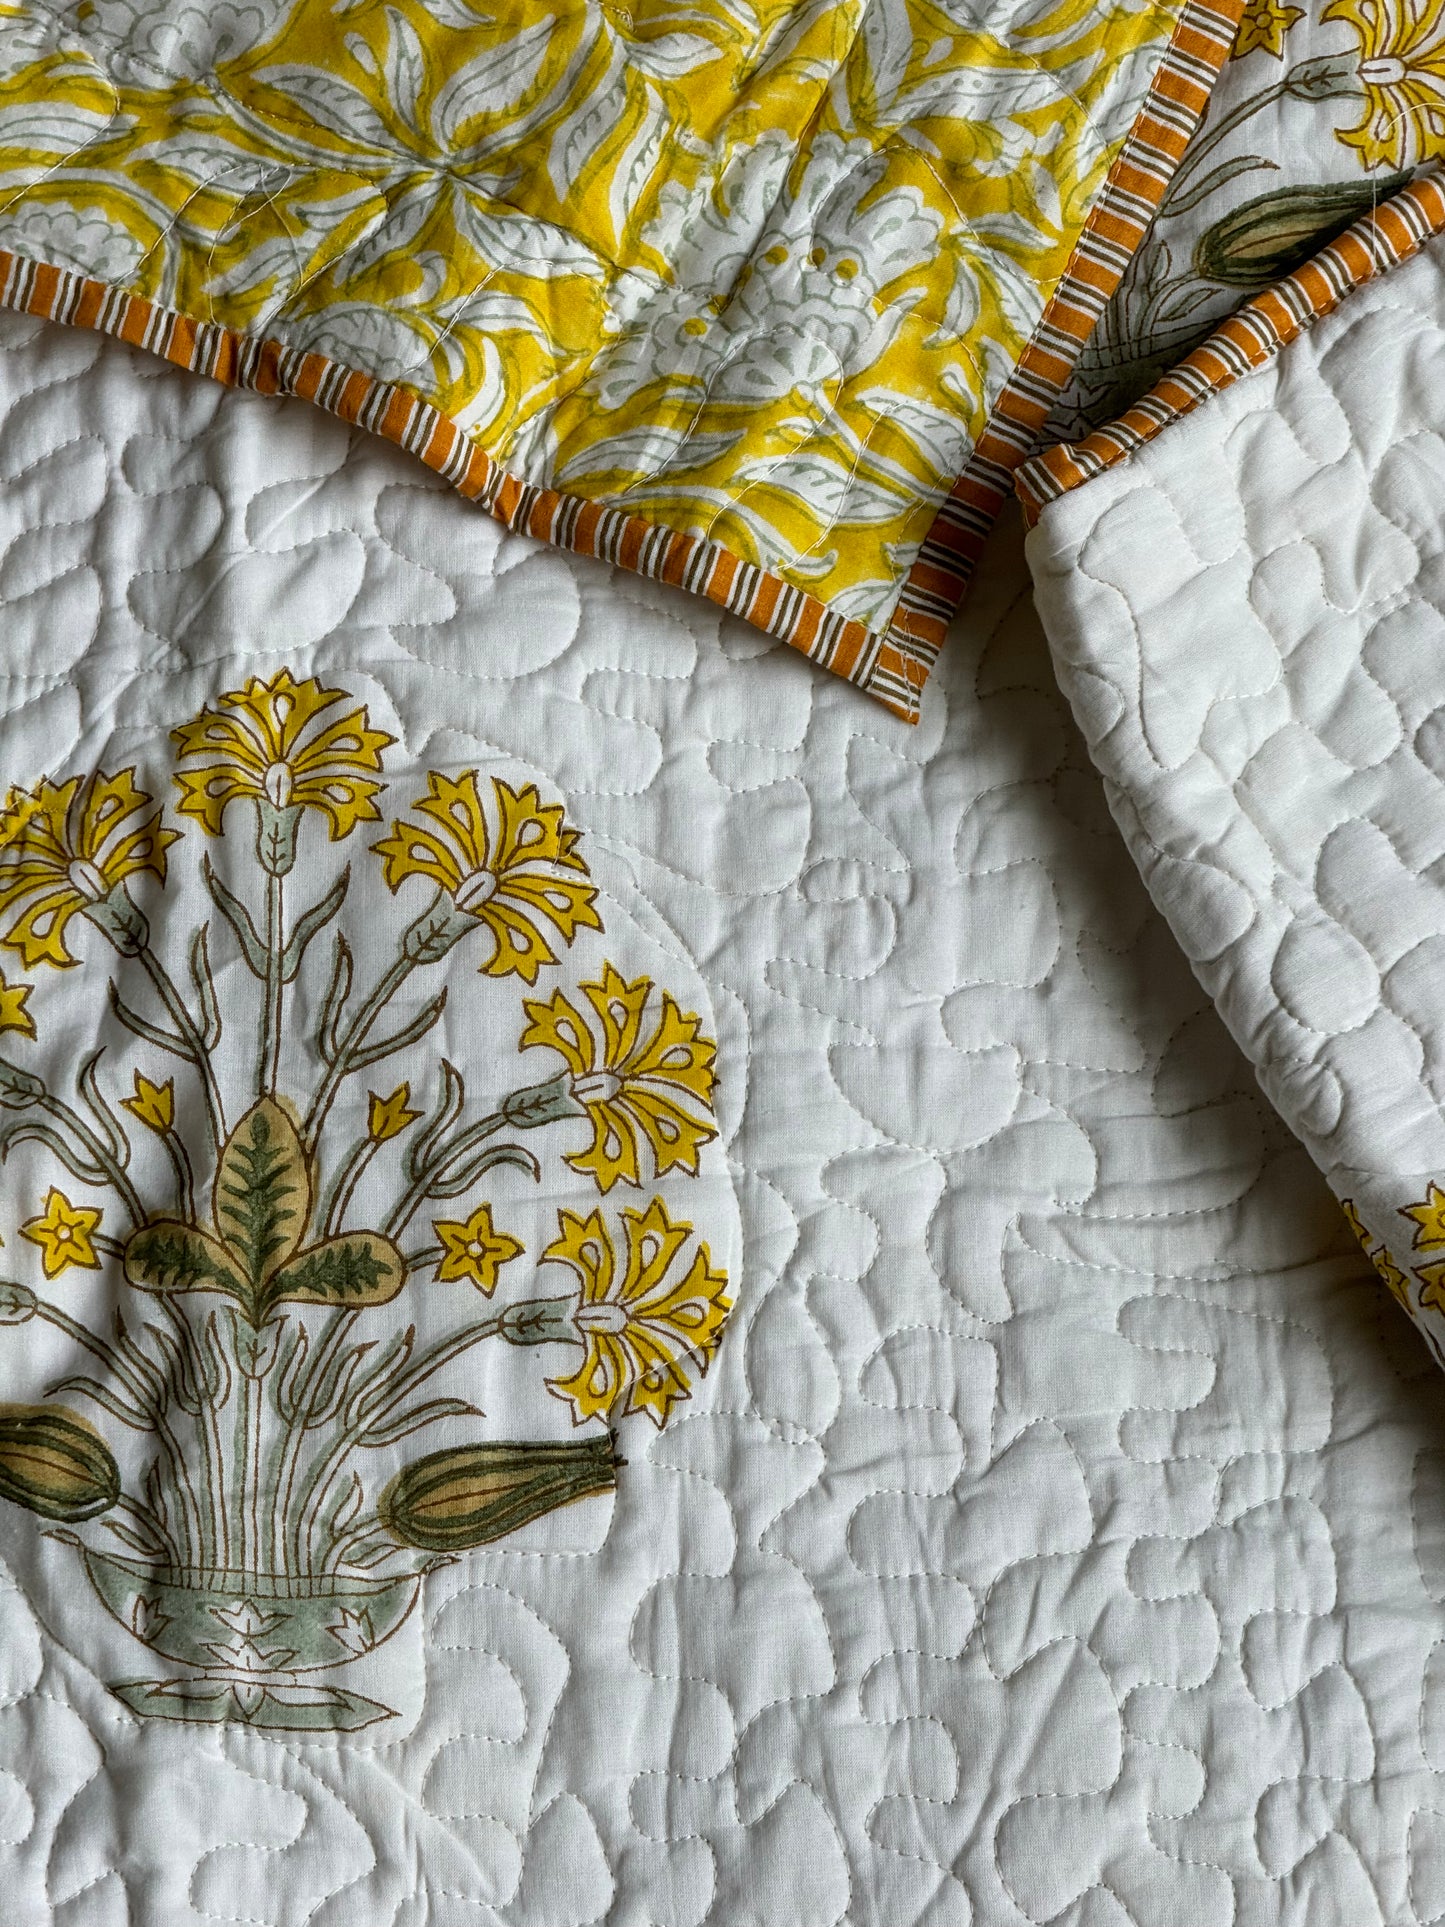 Quilted white and yellow bed cover with 2 pillow cases - hand block printed reversible